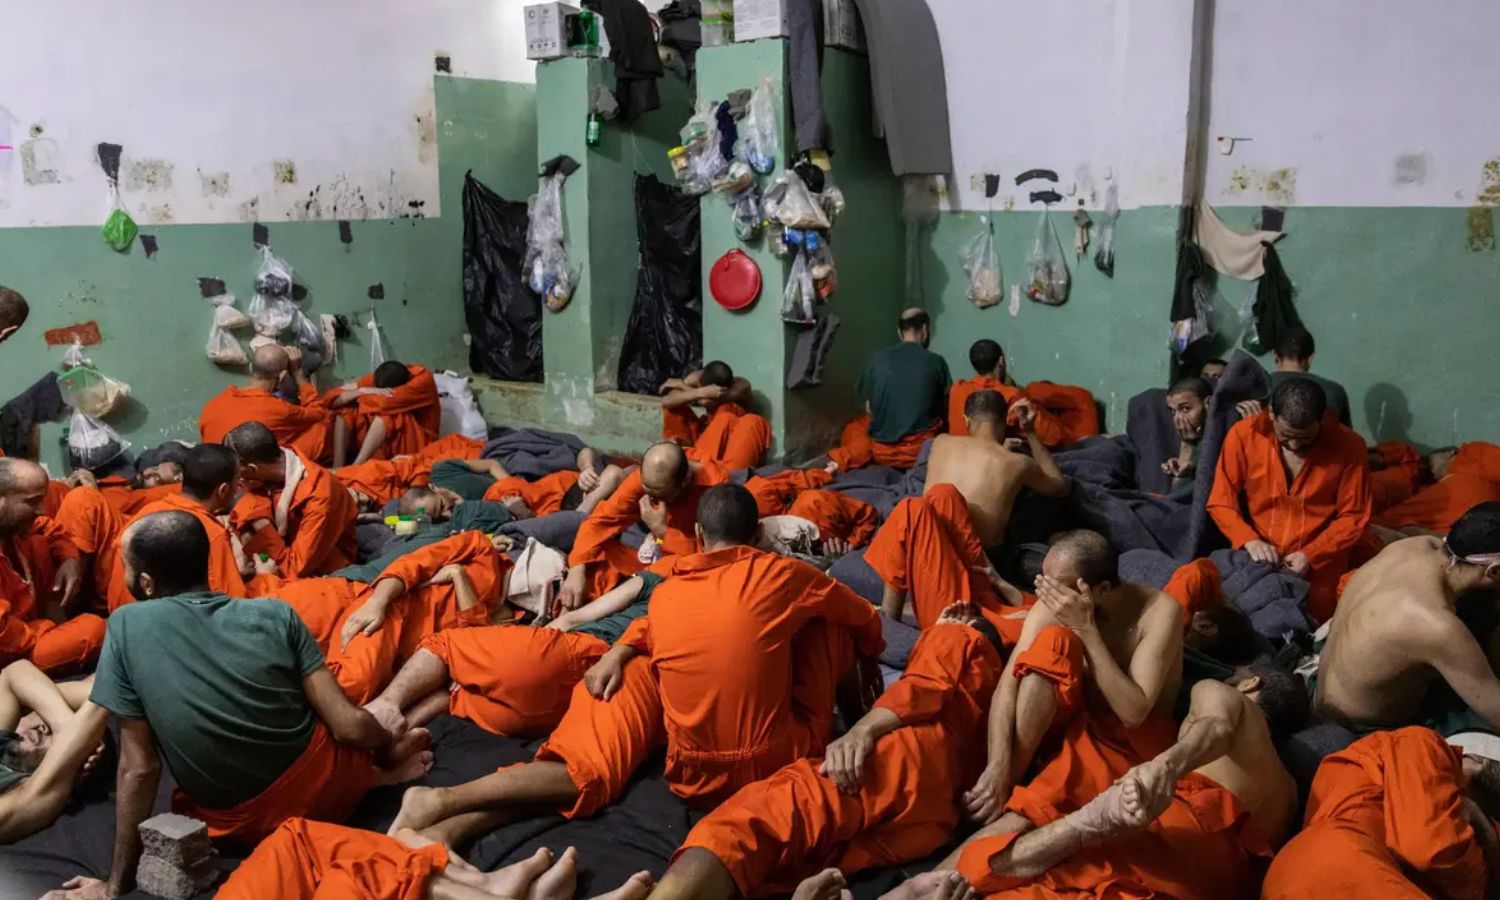 A prison in al-Hasakah where thousands of men are held for being accused of belonging to and fighting with the Islamic State group - 2019 (The New York Times)